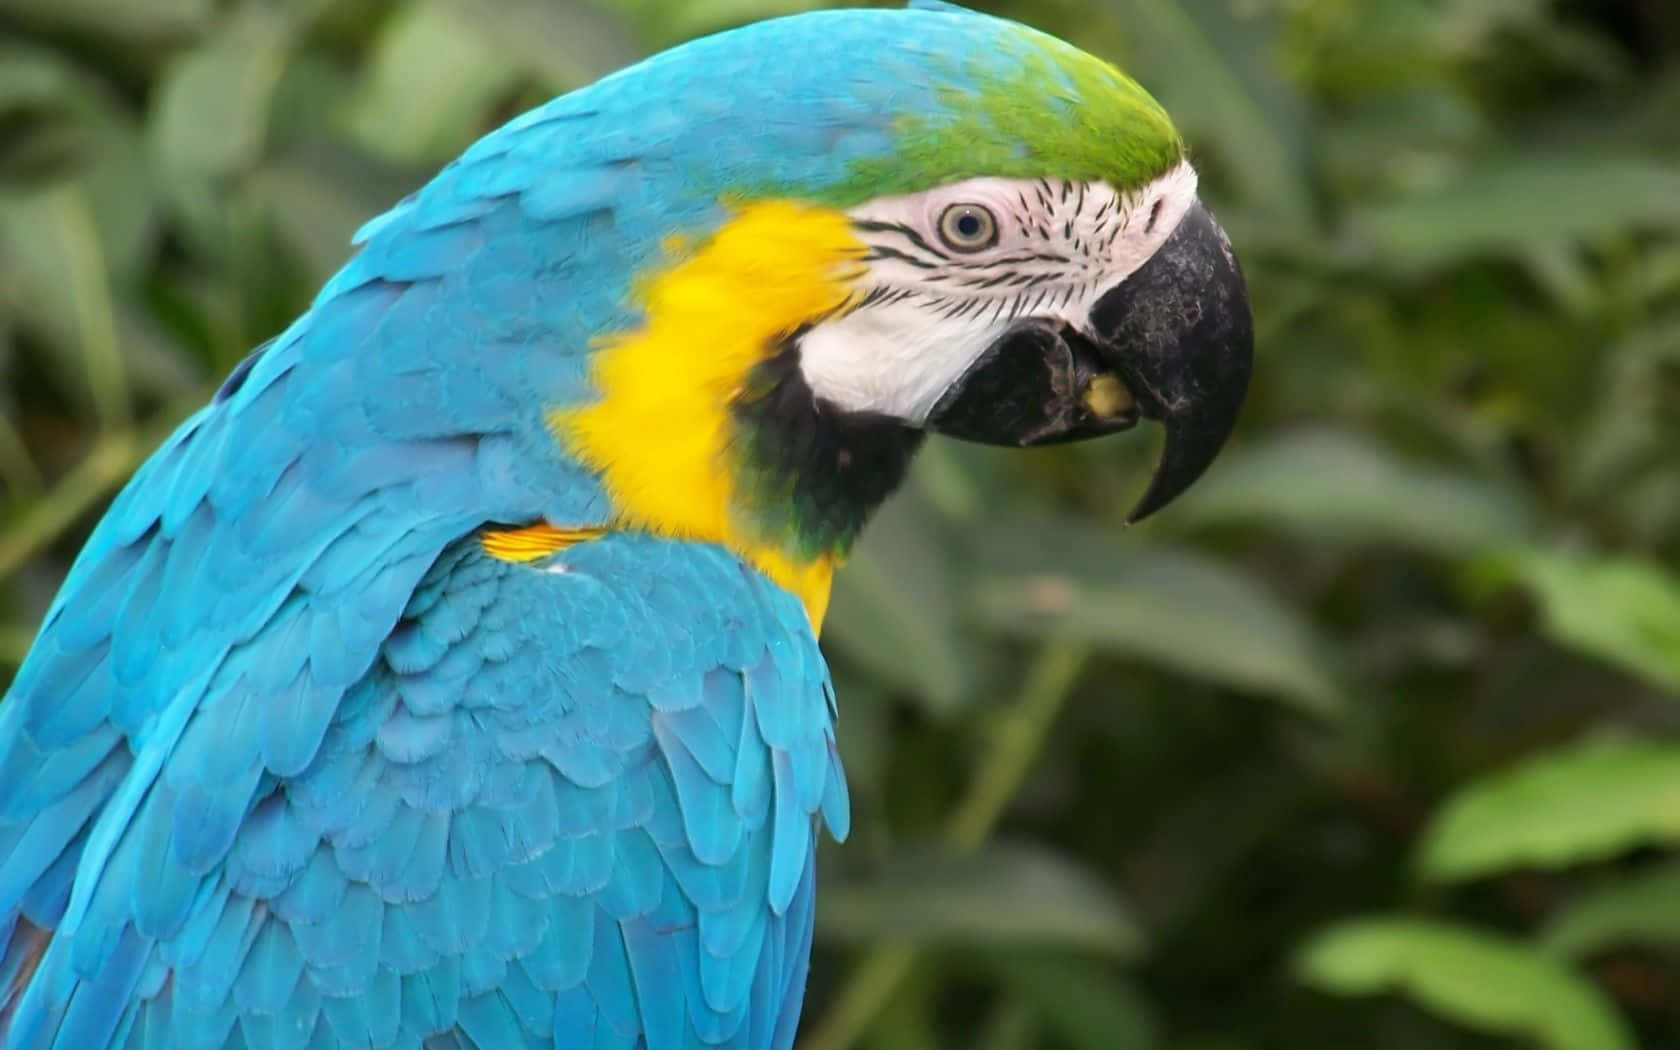 A colorful macaw parrot in close-up